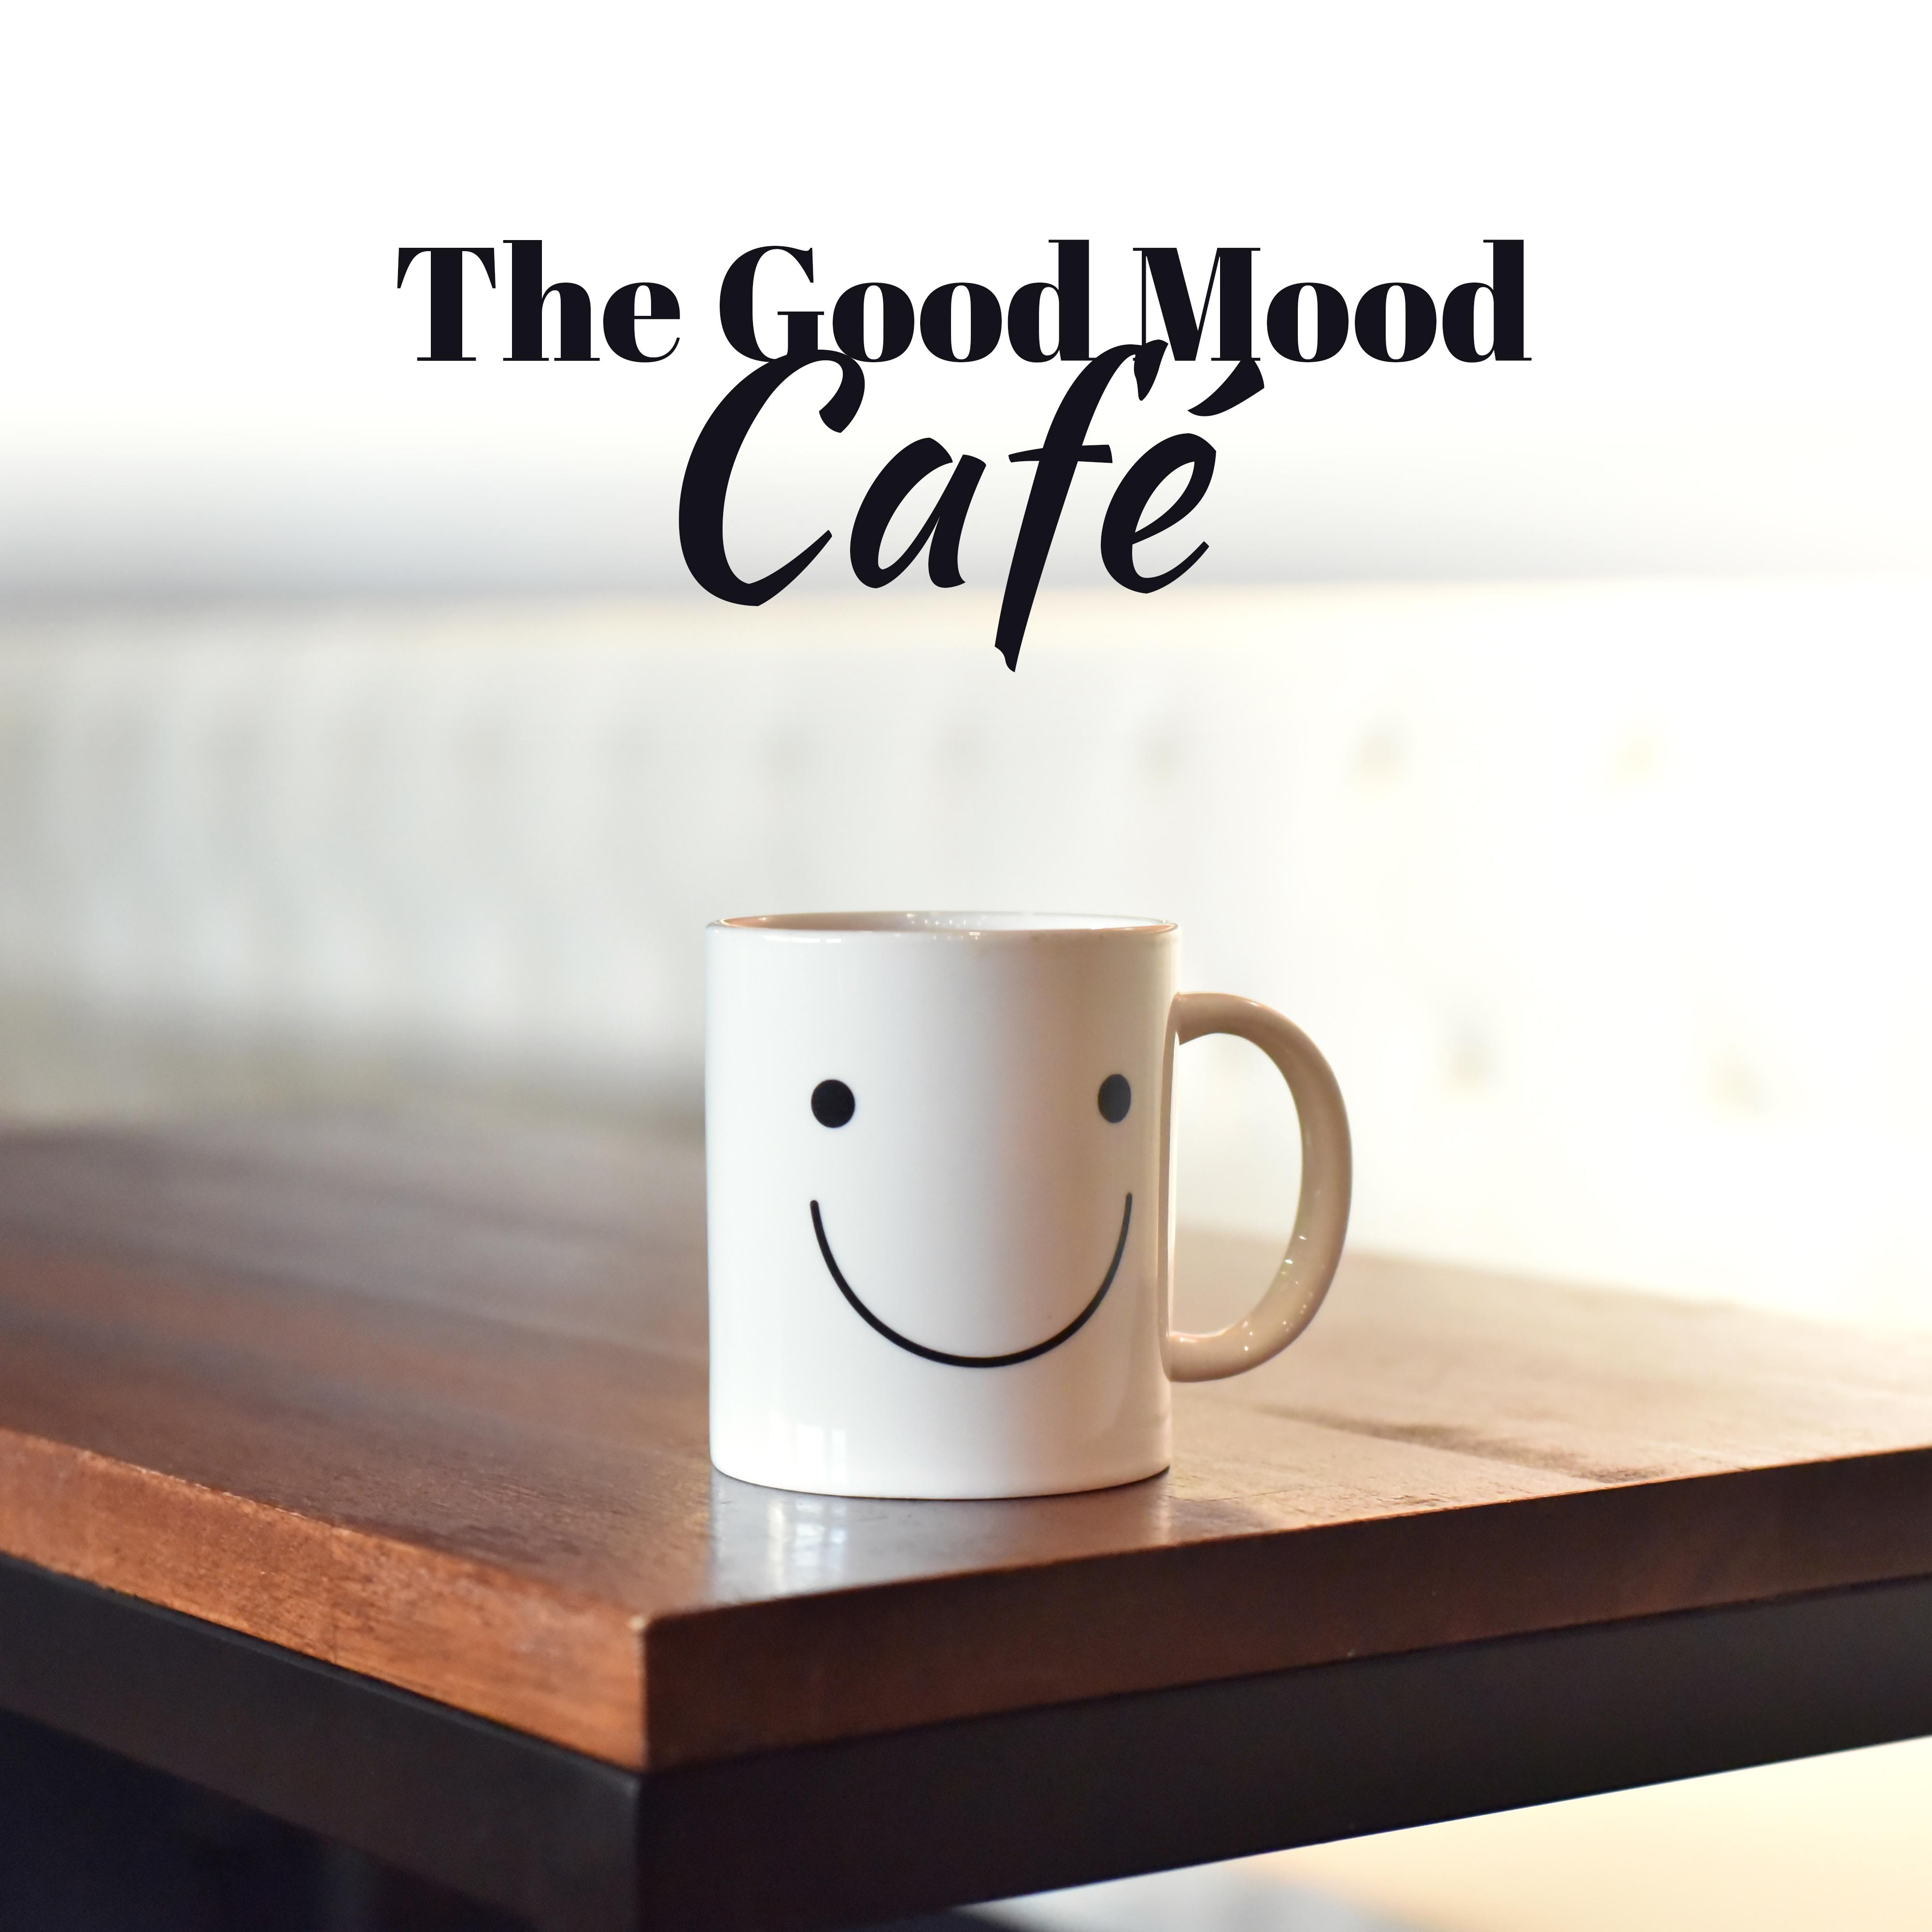 The Good Mood Café – Positive Vibes, Chillout, Music for Cafe, Coffee Lounge, Chill Out 2017